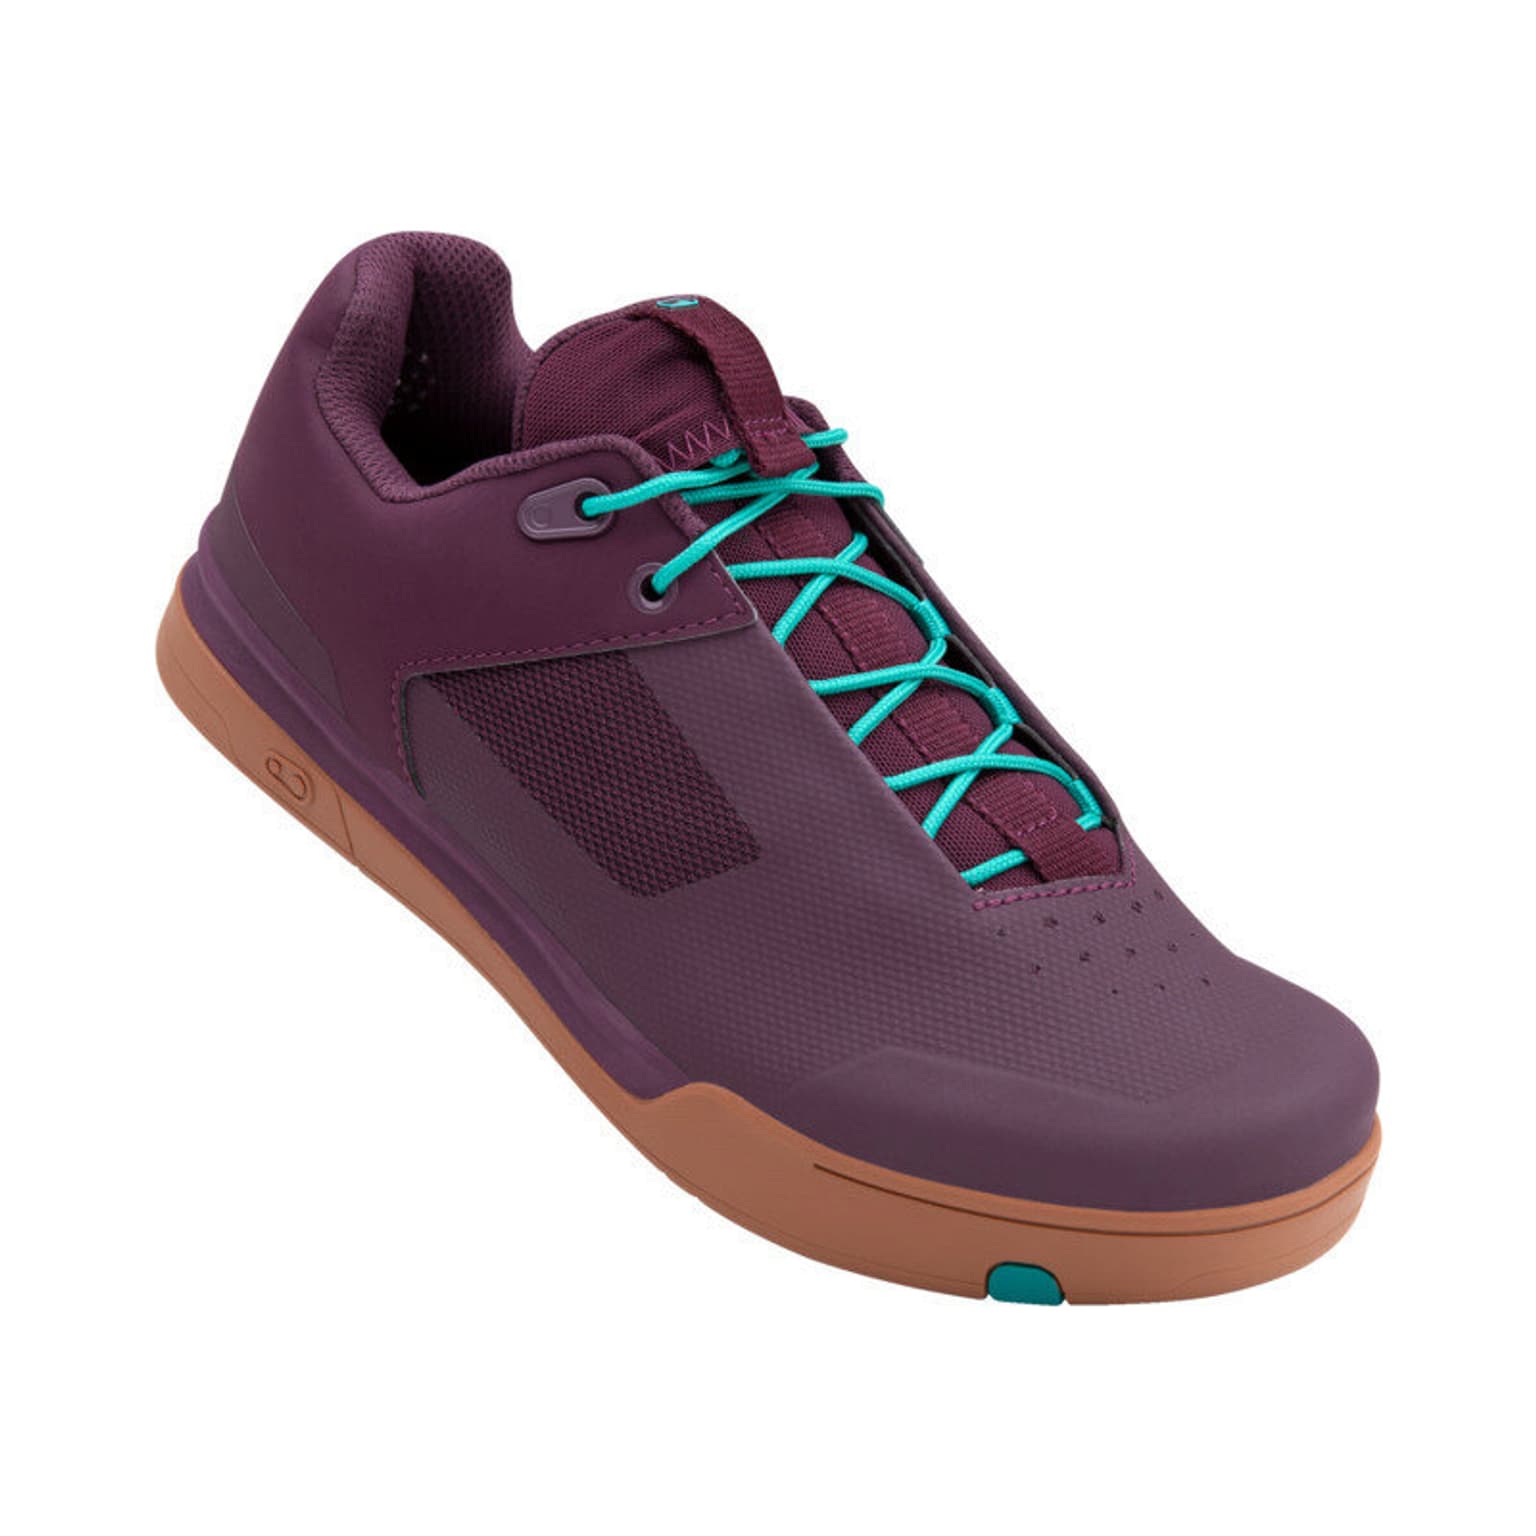 crankbrothers crankbrothers Mallet Lace Chaussures de cyclisme aubergine 2